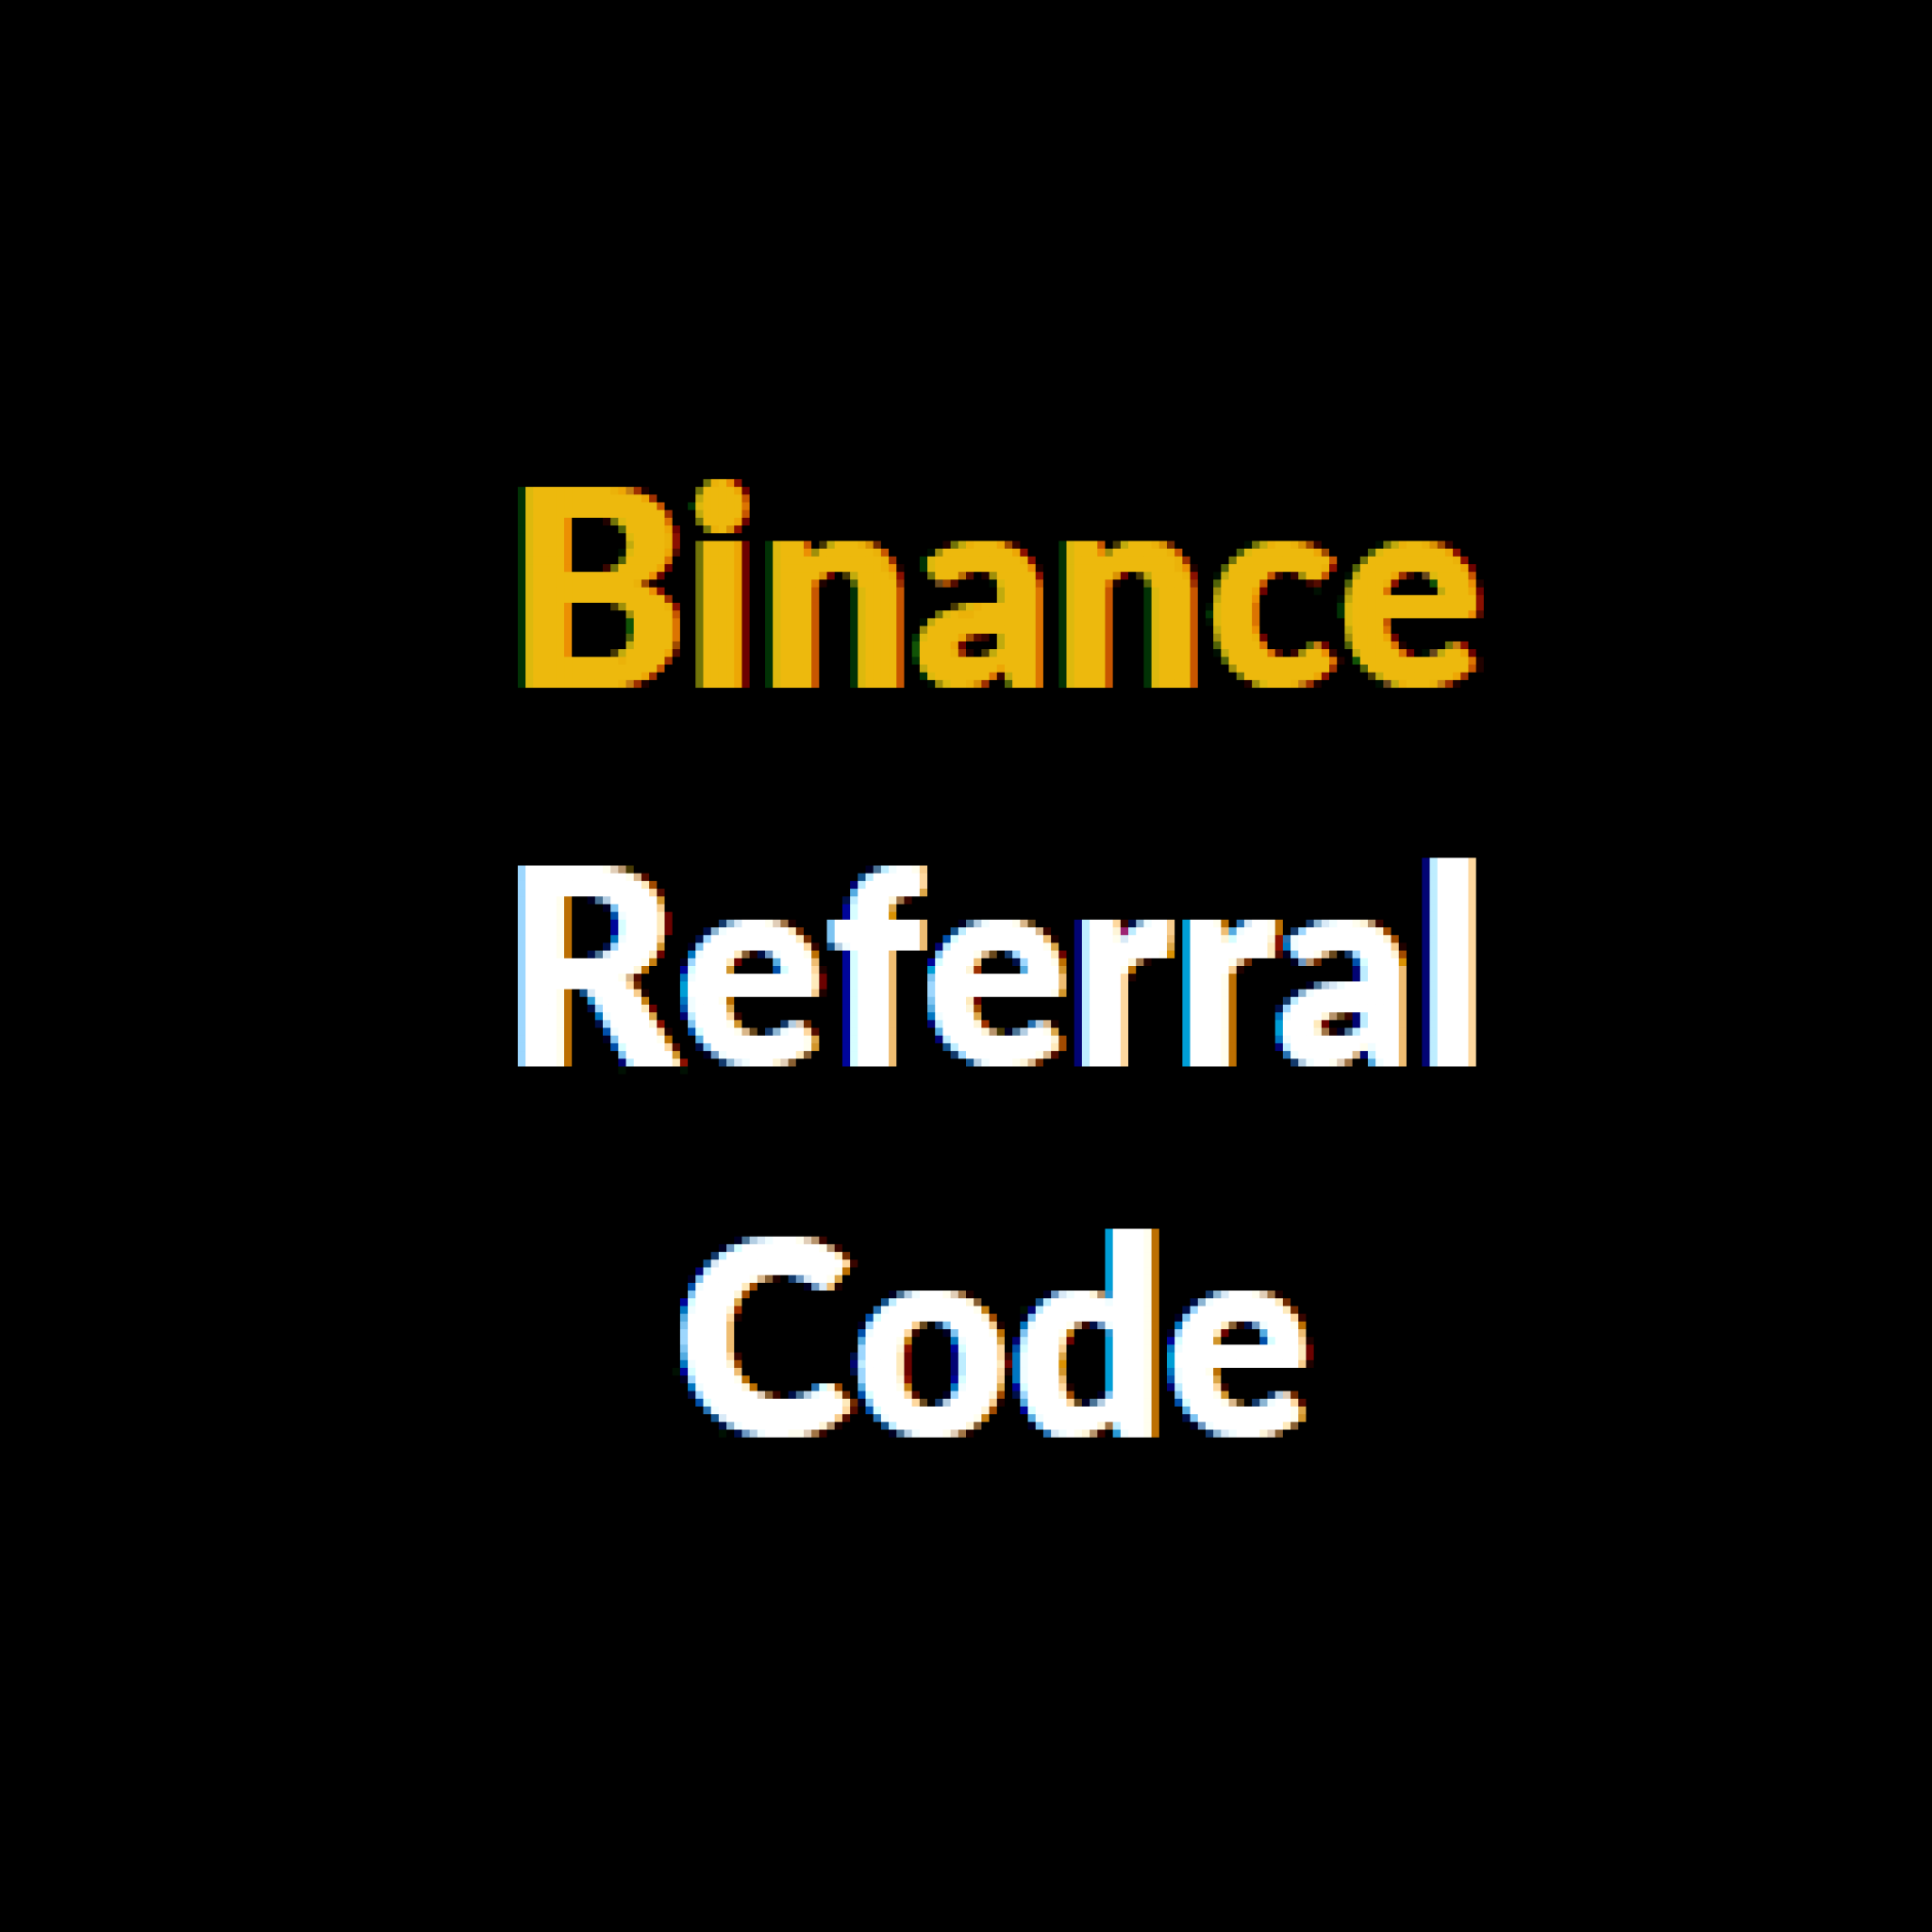 Binance Referral Code [2021]: Get 40% Commission Instantly